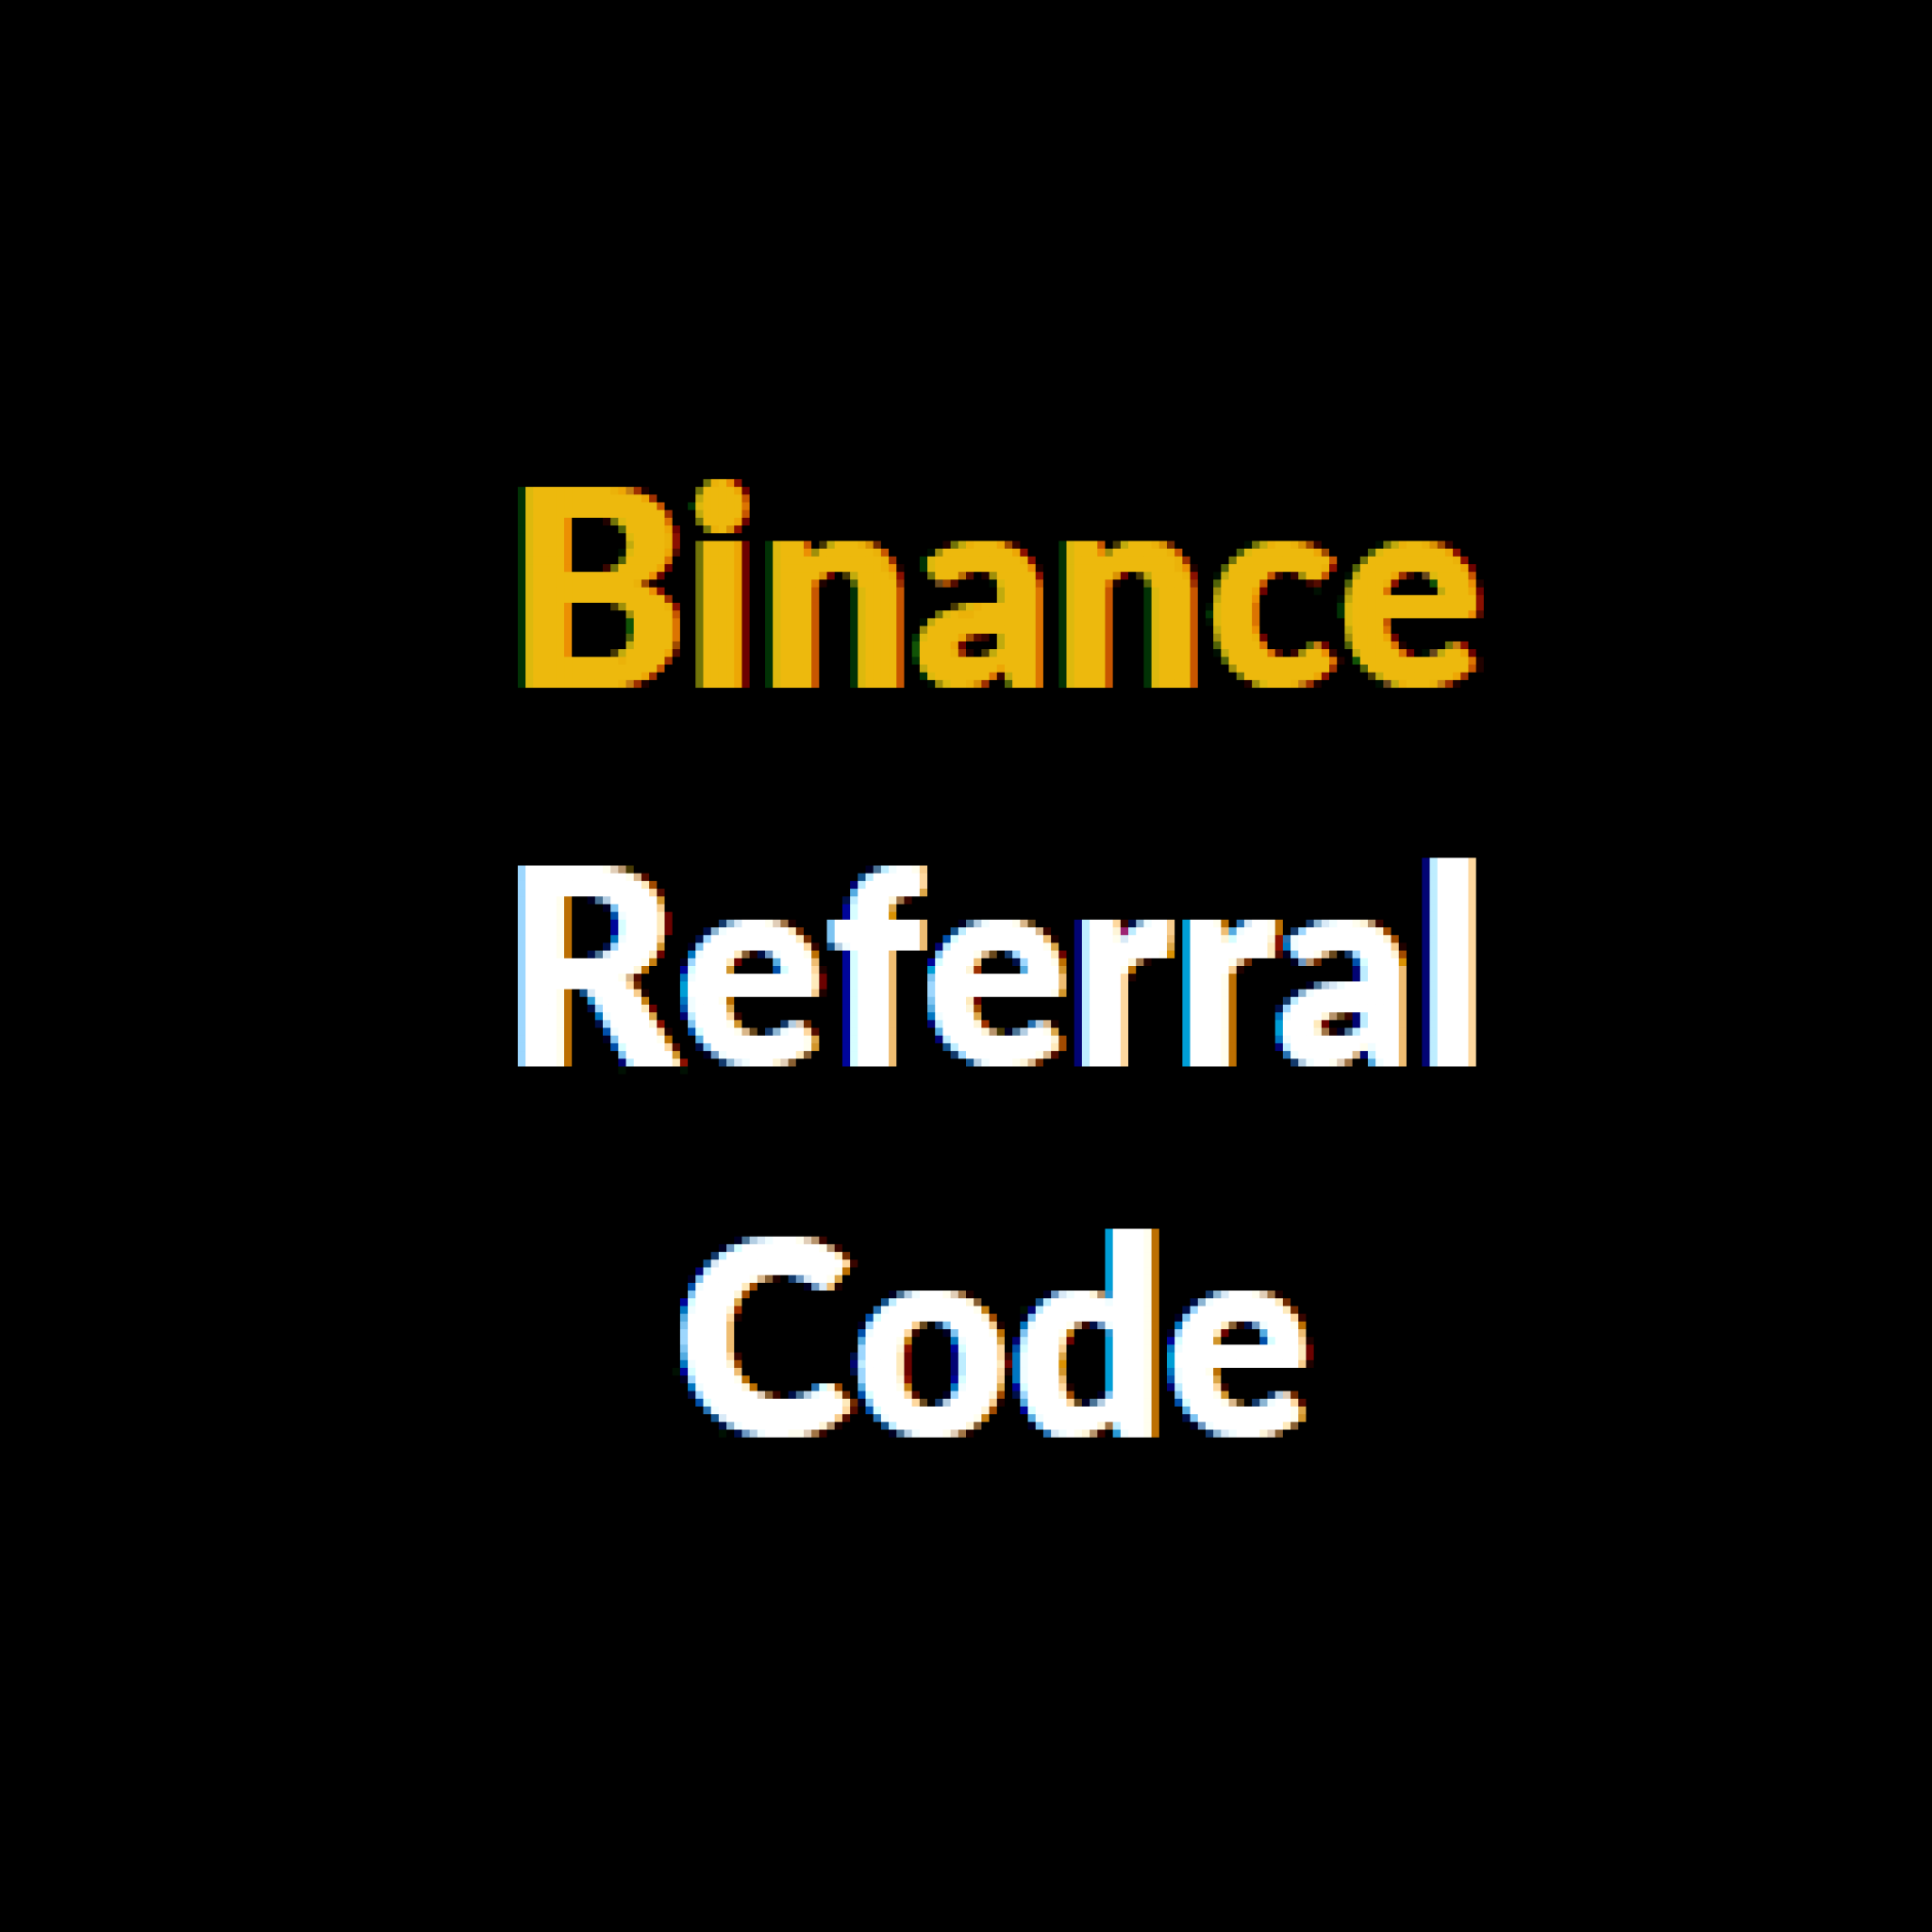 Binance Referral Code [2021]: Get 40% Commission Instantly